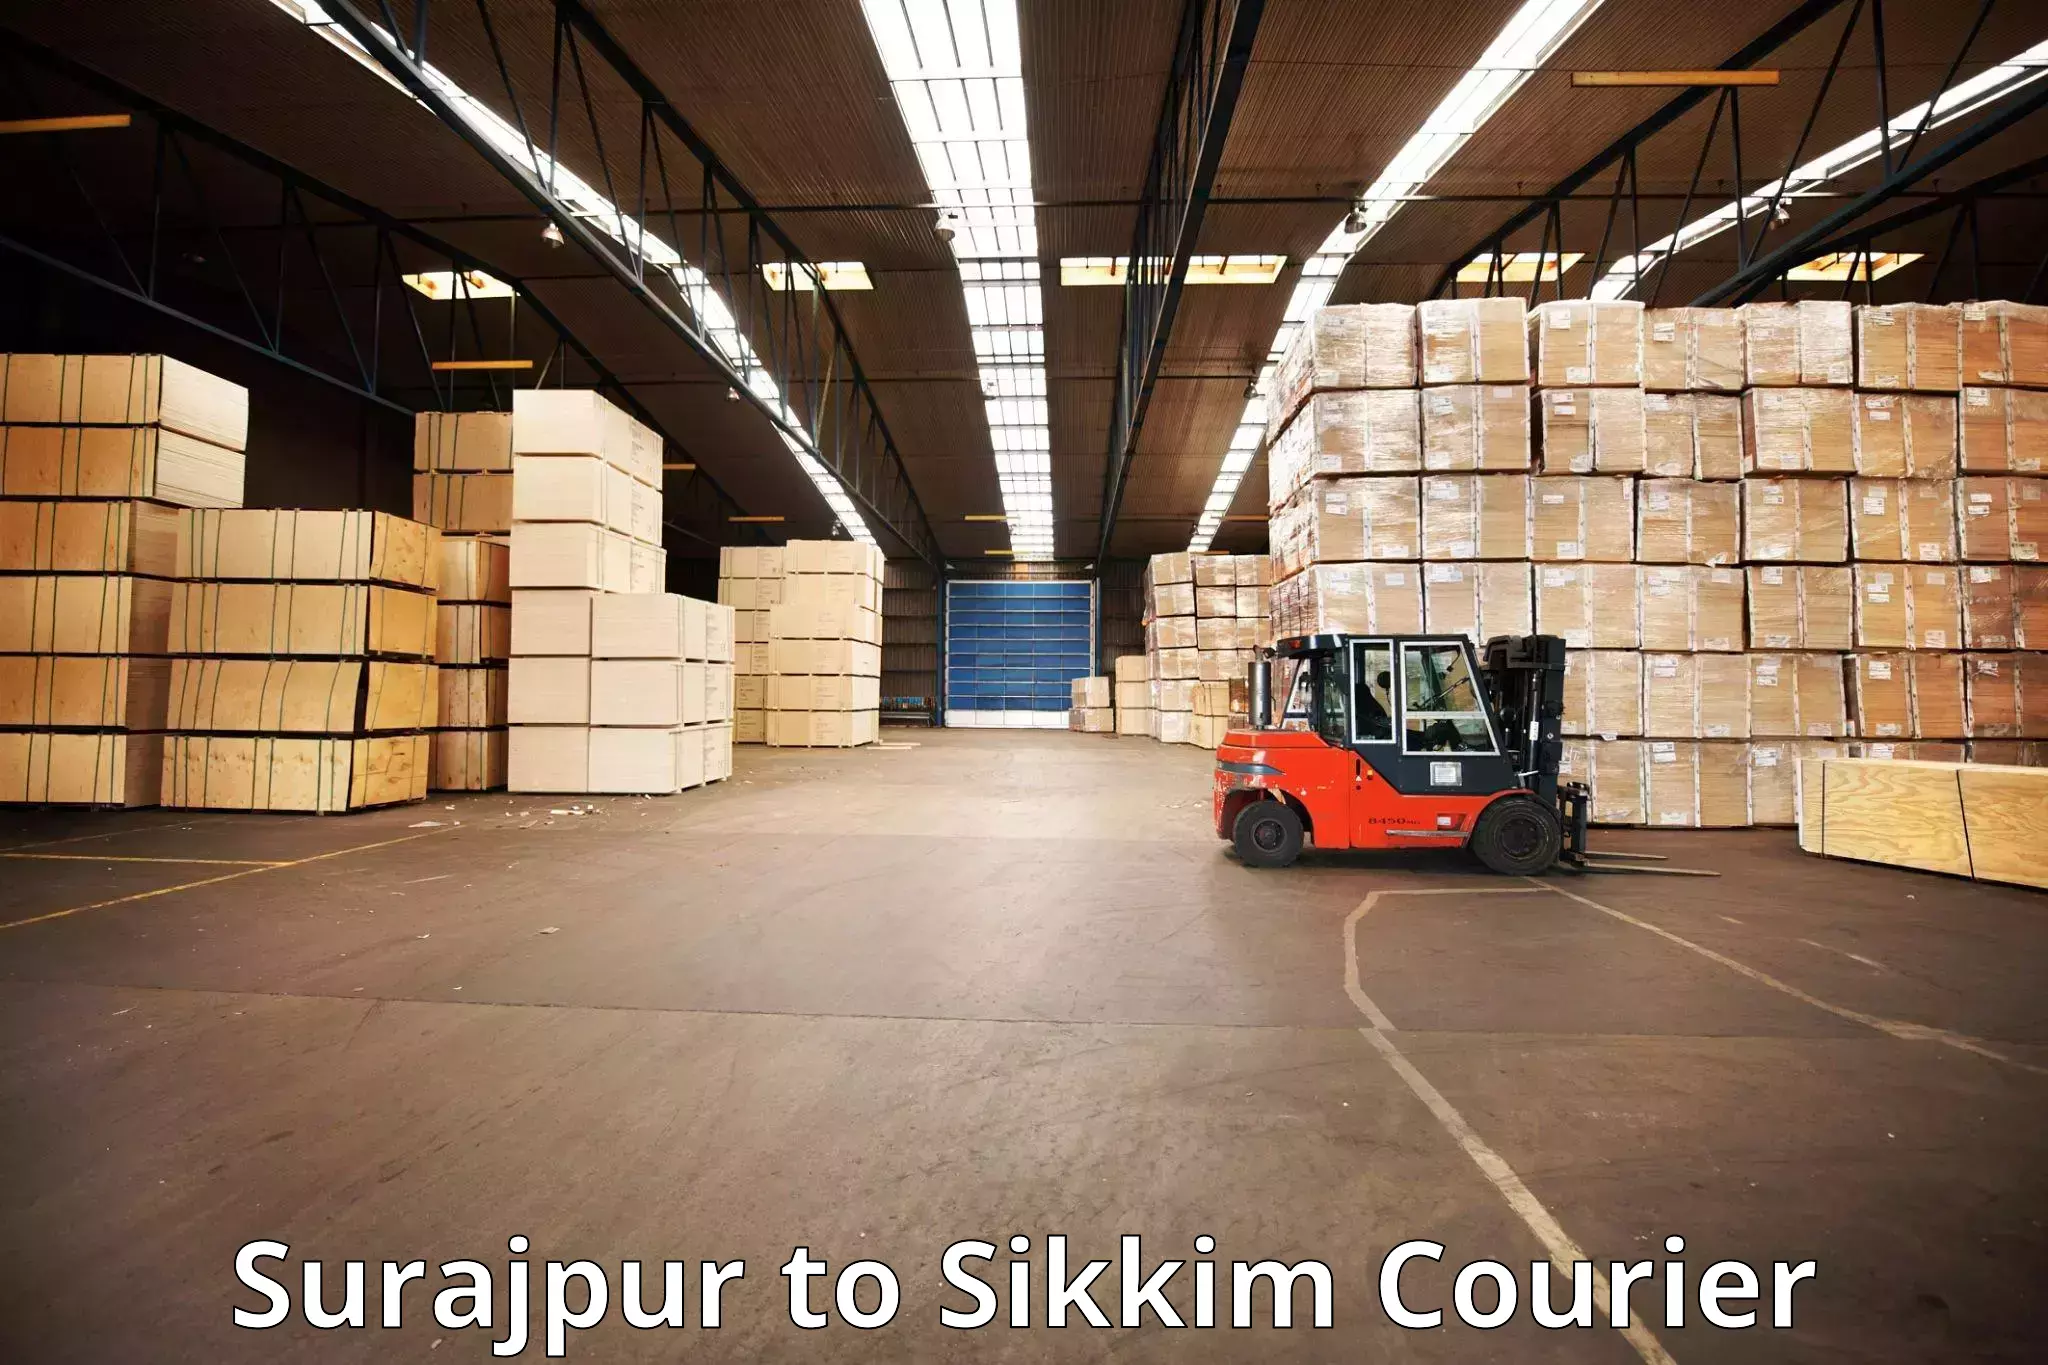 Luggage shipment specialists Surajpur to Pelling